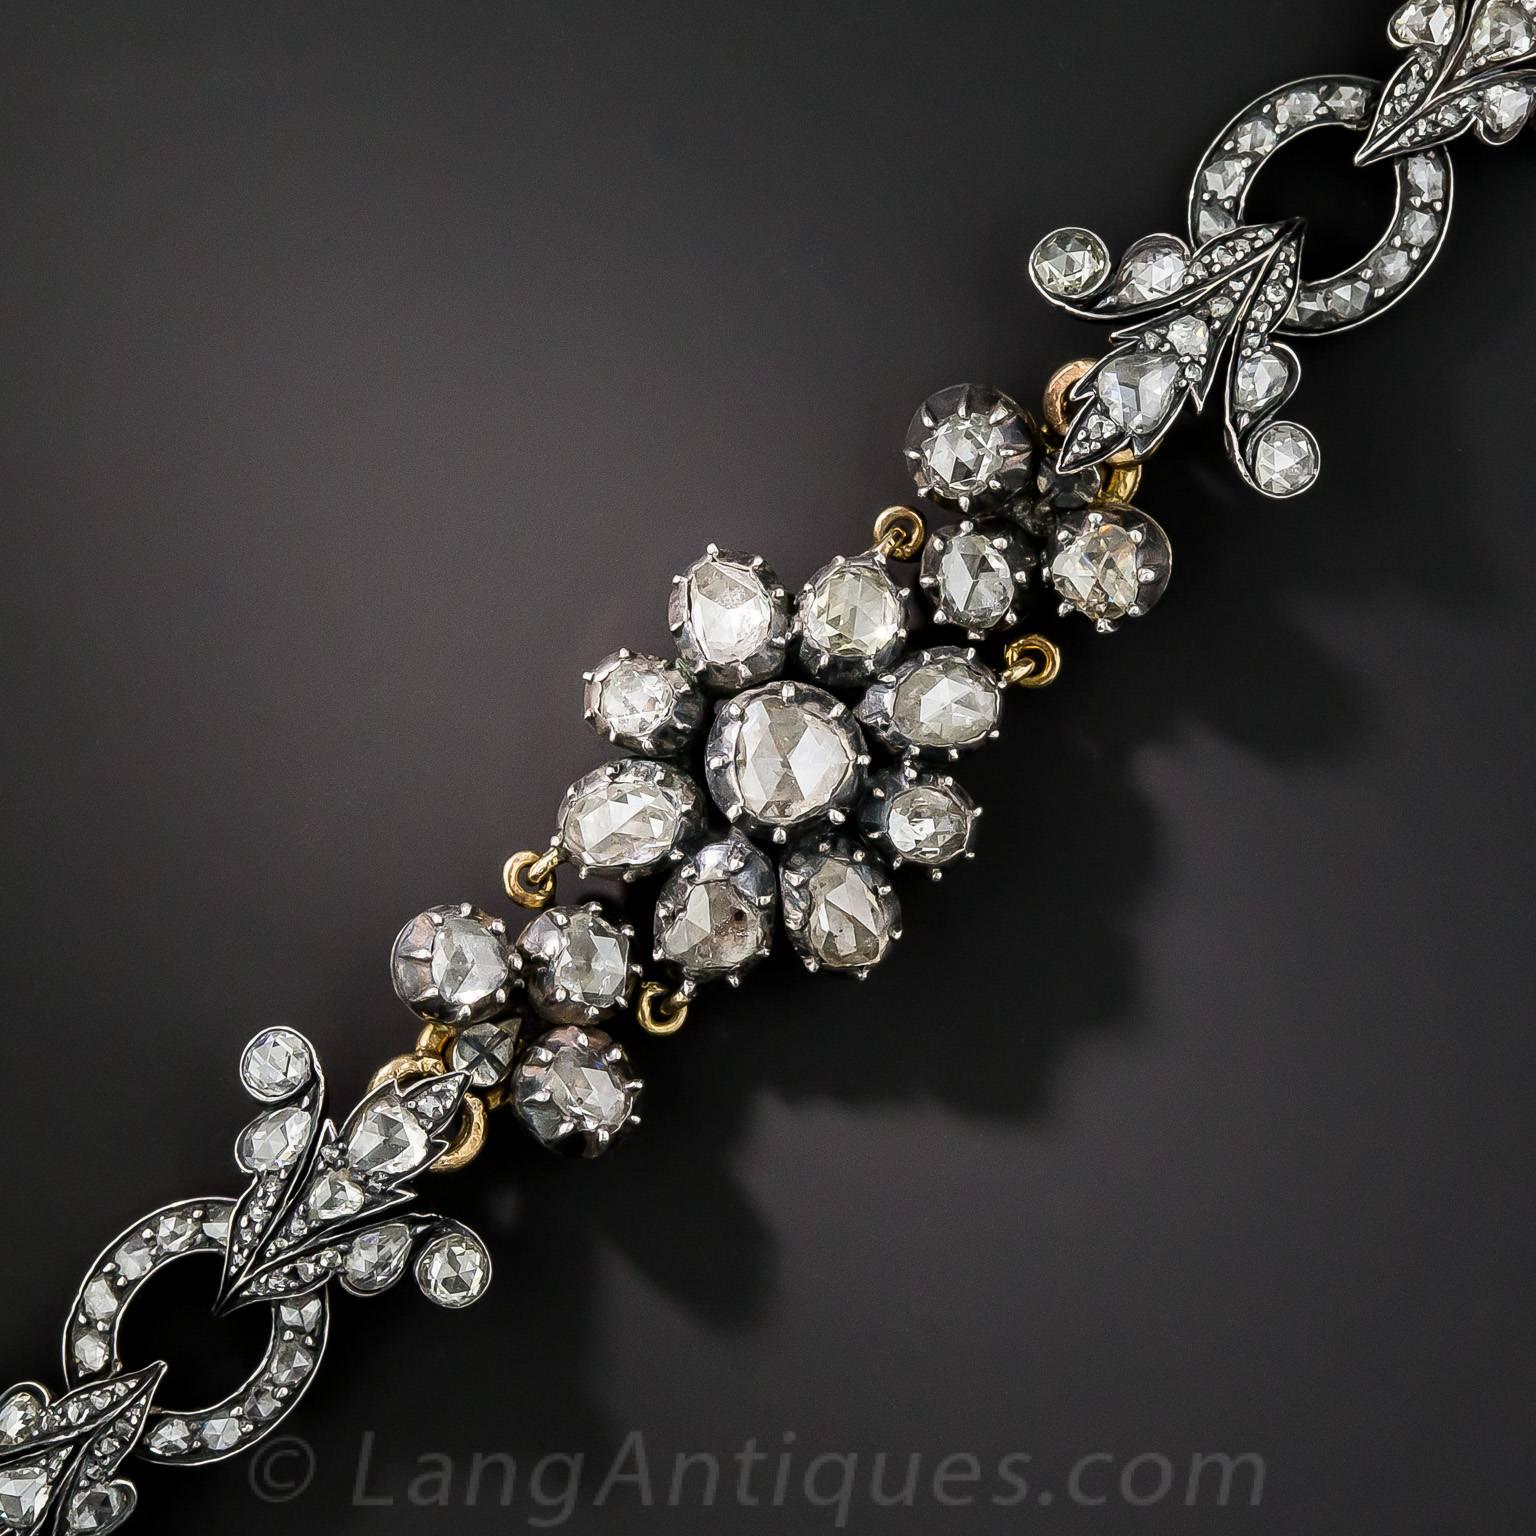 This romantic rose-cut rarity glistens and glows by sunlight or candlelight (as when it was made), with over 10 carats of brightly scintillating rose-cut diamonds. Handcrafted in darkened silver over 18K gold, this ravishing bracelet was imported